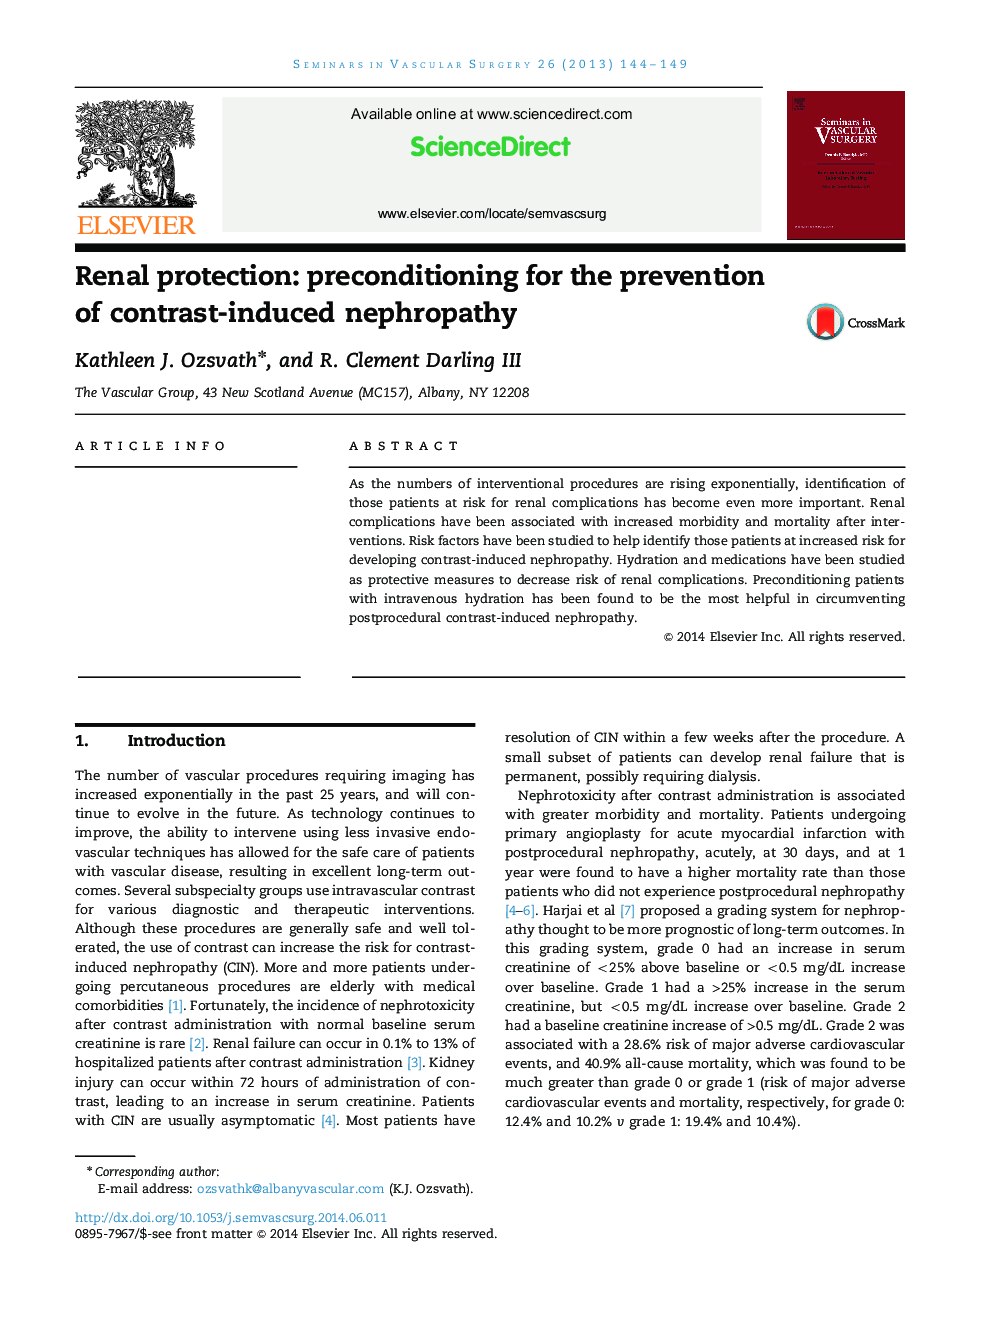 Renal protection: preconditioning for the prevention of contrast-induced nephropathy